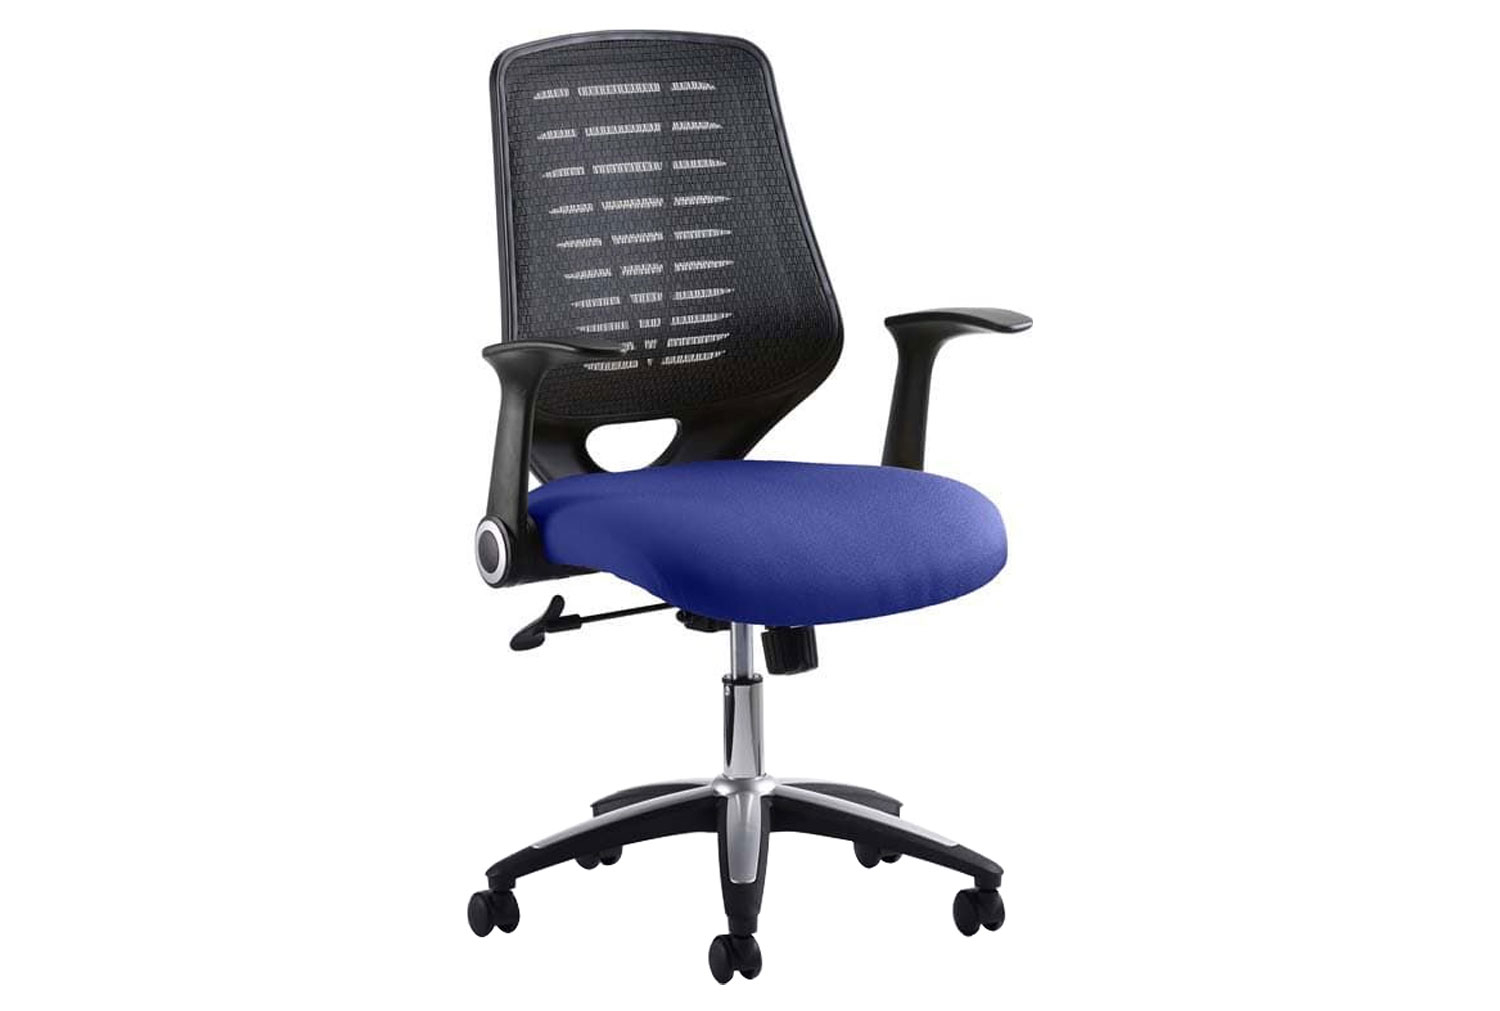 Baton Mesh Back Operator Office Chair With Fabric Seat And Arms, Stevia Blue